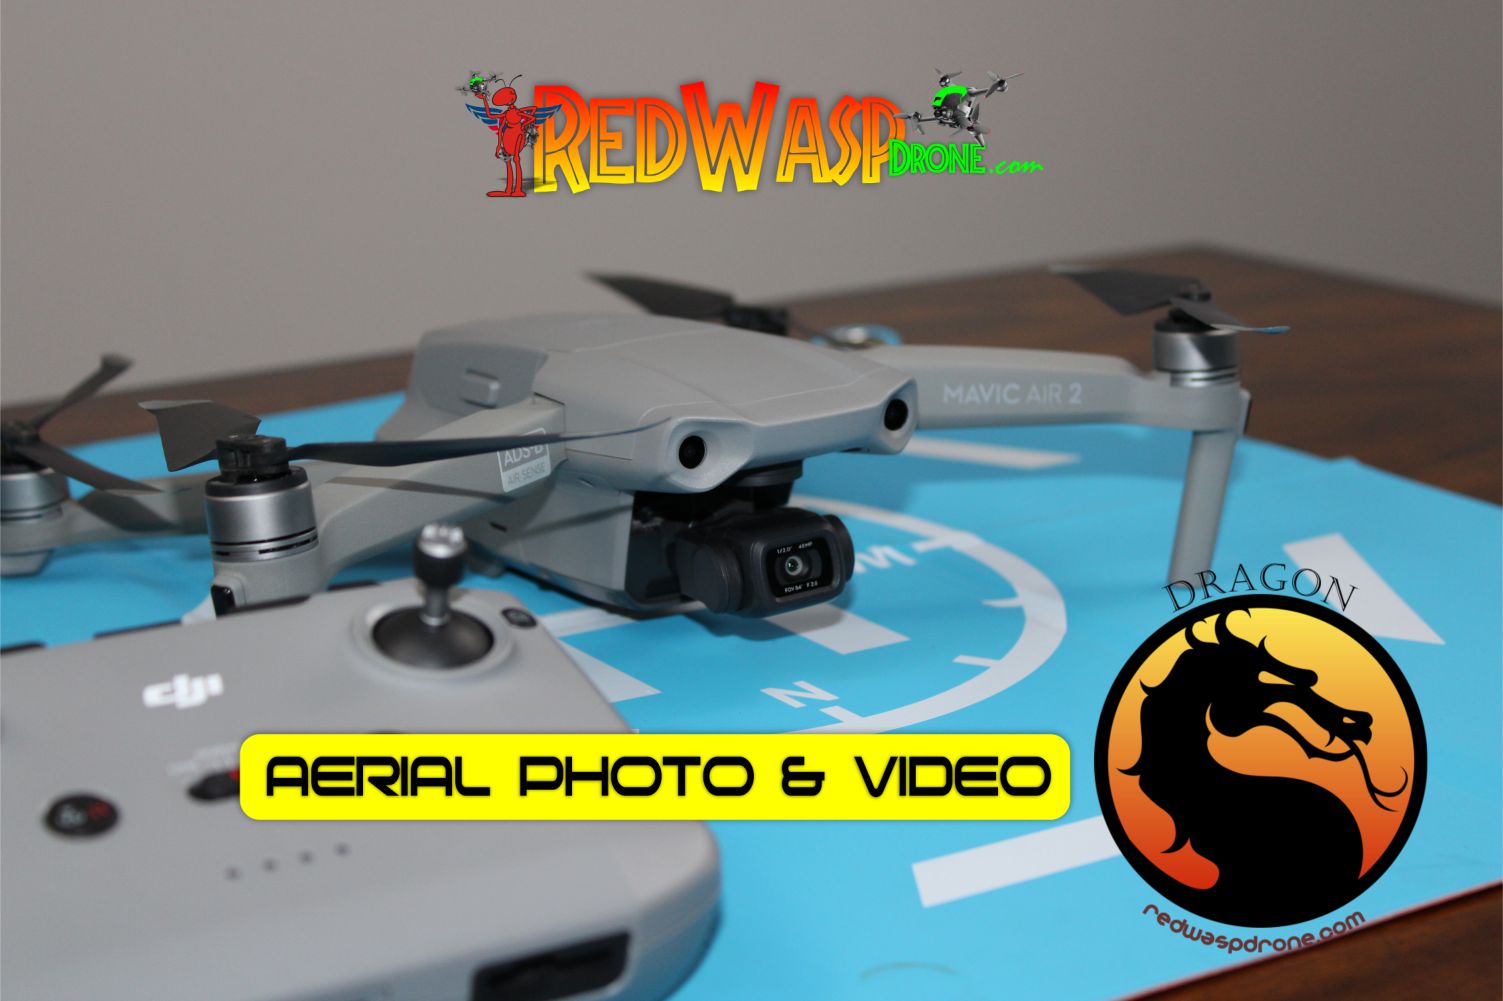 Drone Service, Drone Video, Drone Mapping, Drone Photography, Drone 4K Video Services, Drone Service in Pensacola, Drone Service in Milton, Drone Service in Pace, RedWasp Drone,